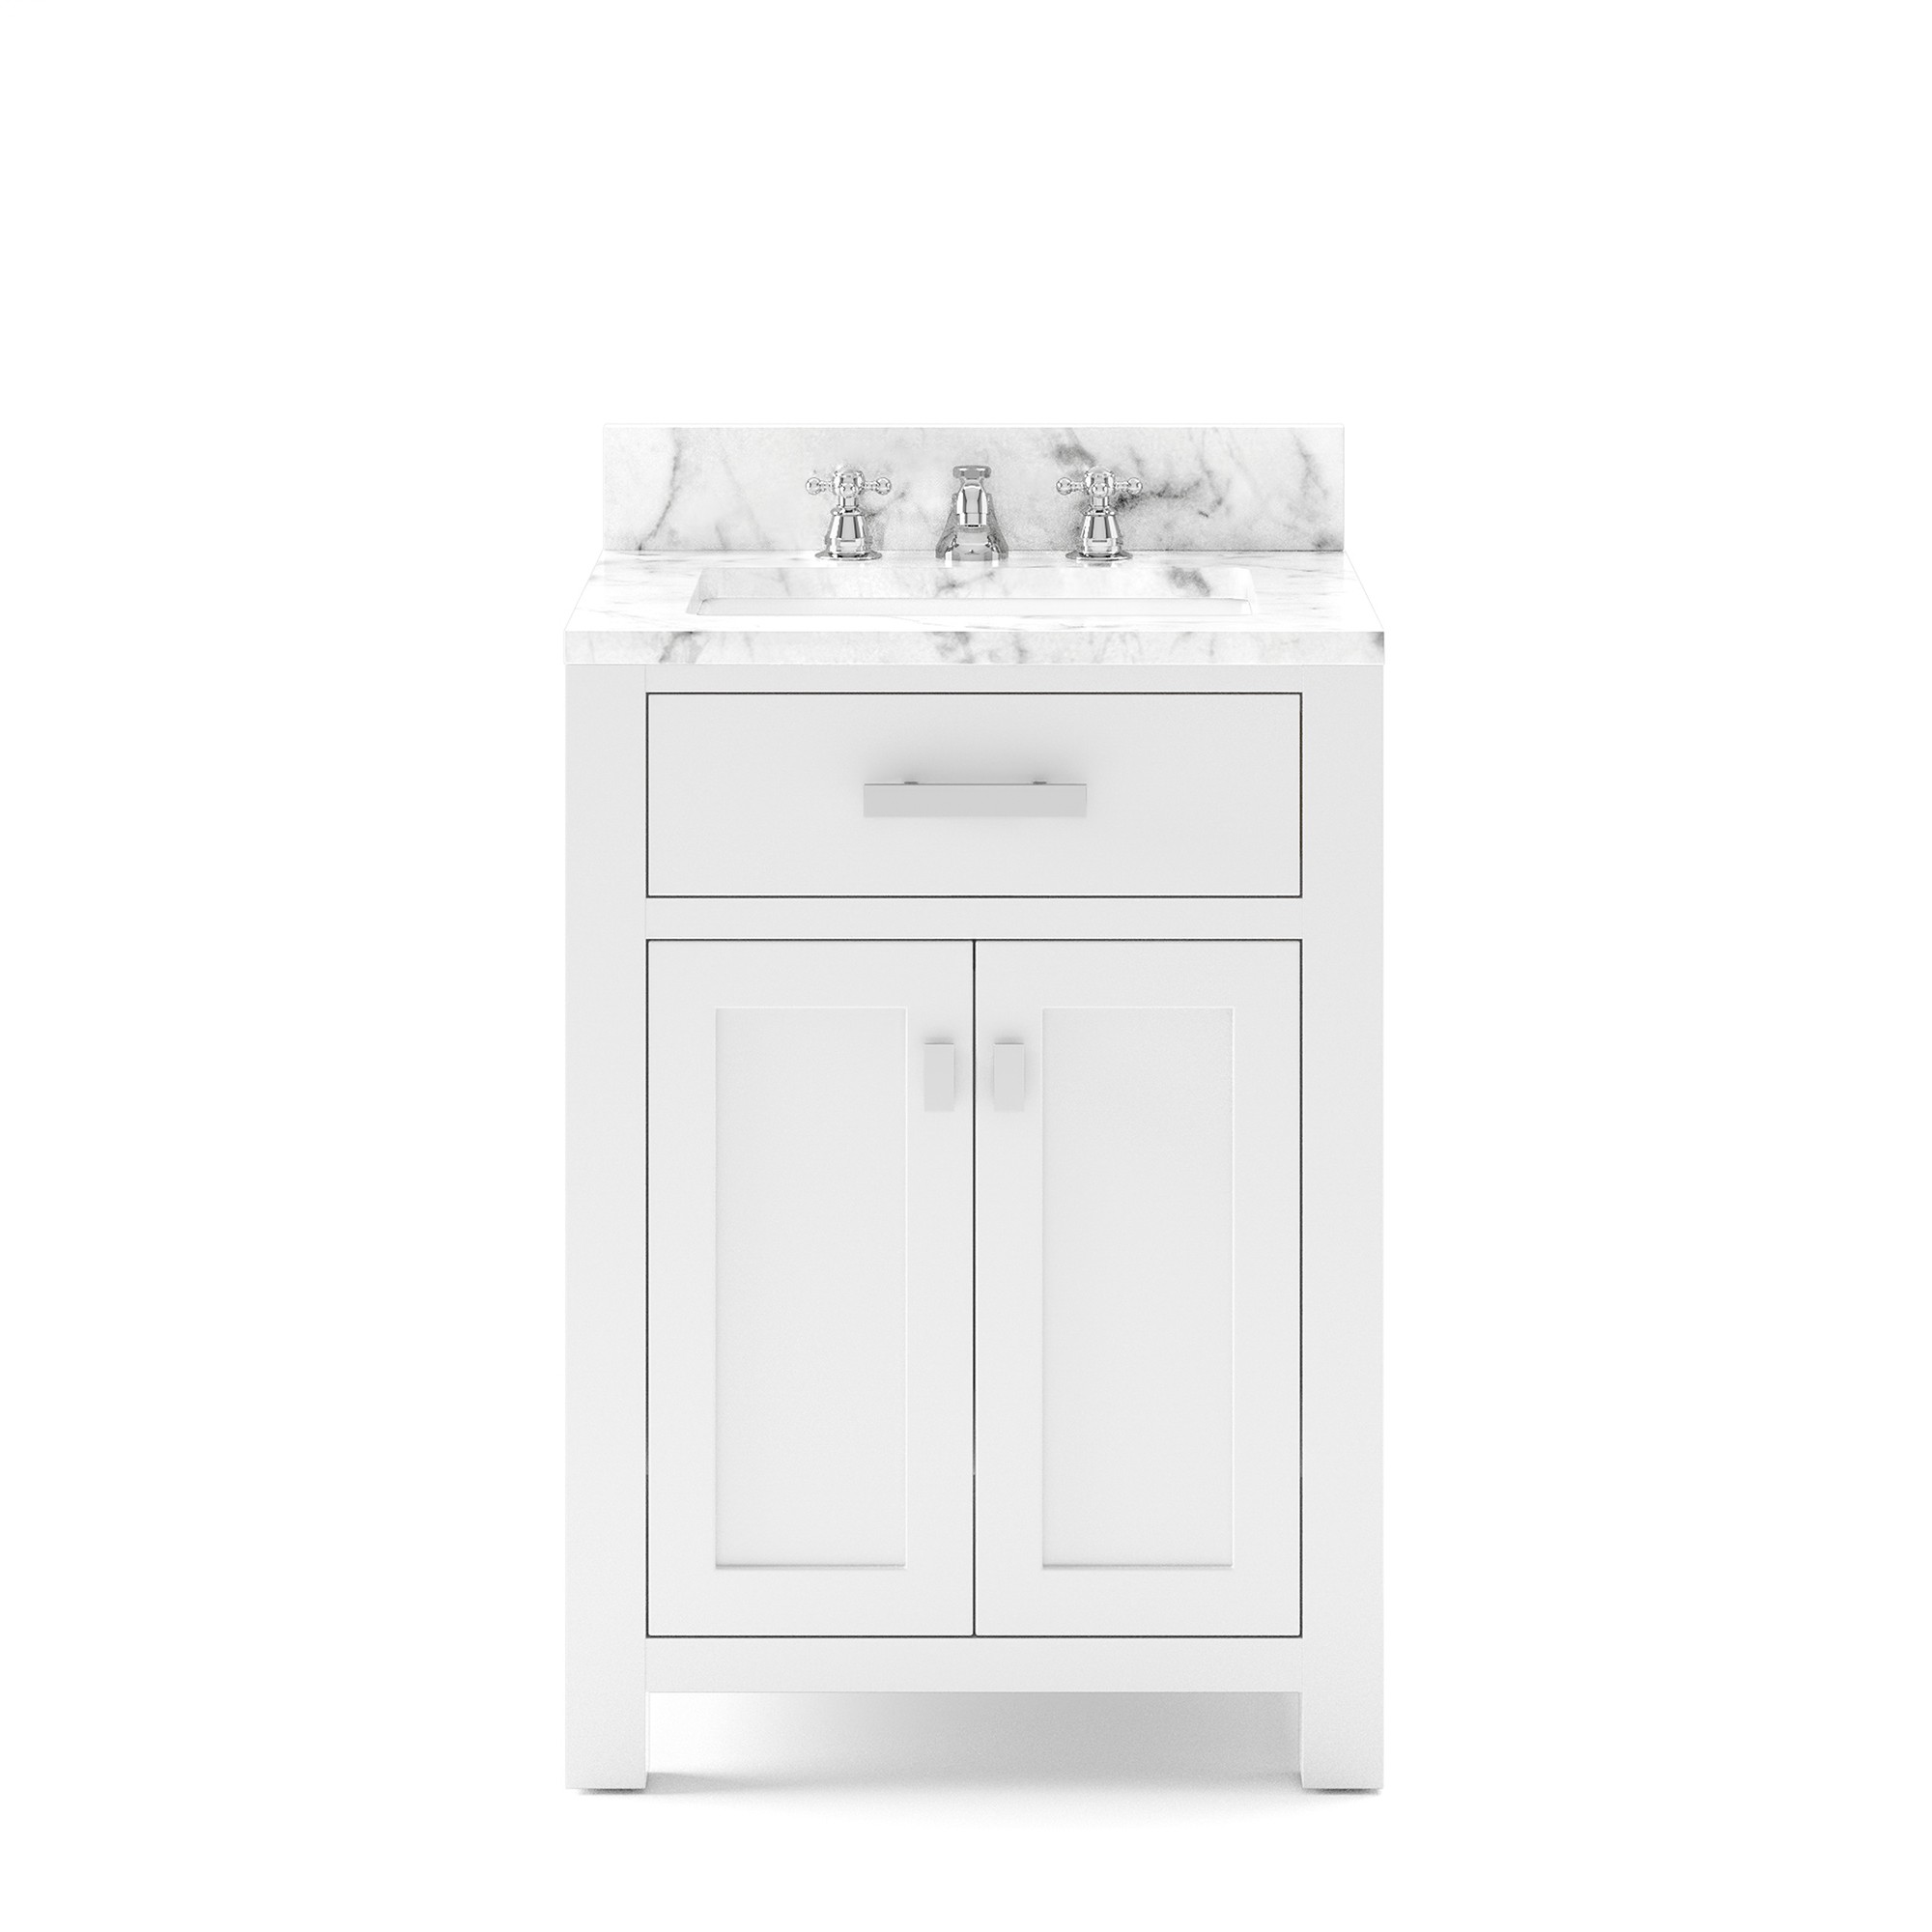 WATER-CREATION MS24CW01PW-000000000 MADISON 24 INCH PURE WHITE SINGLE SINK BATHROOM VANITY